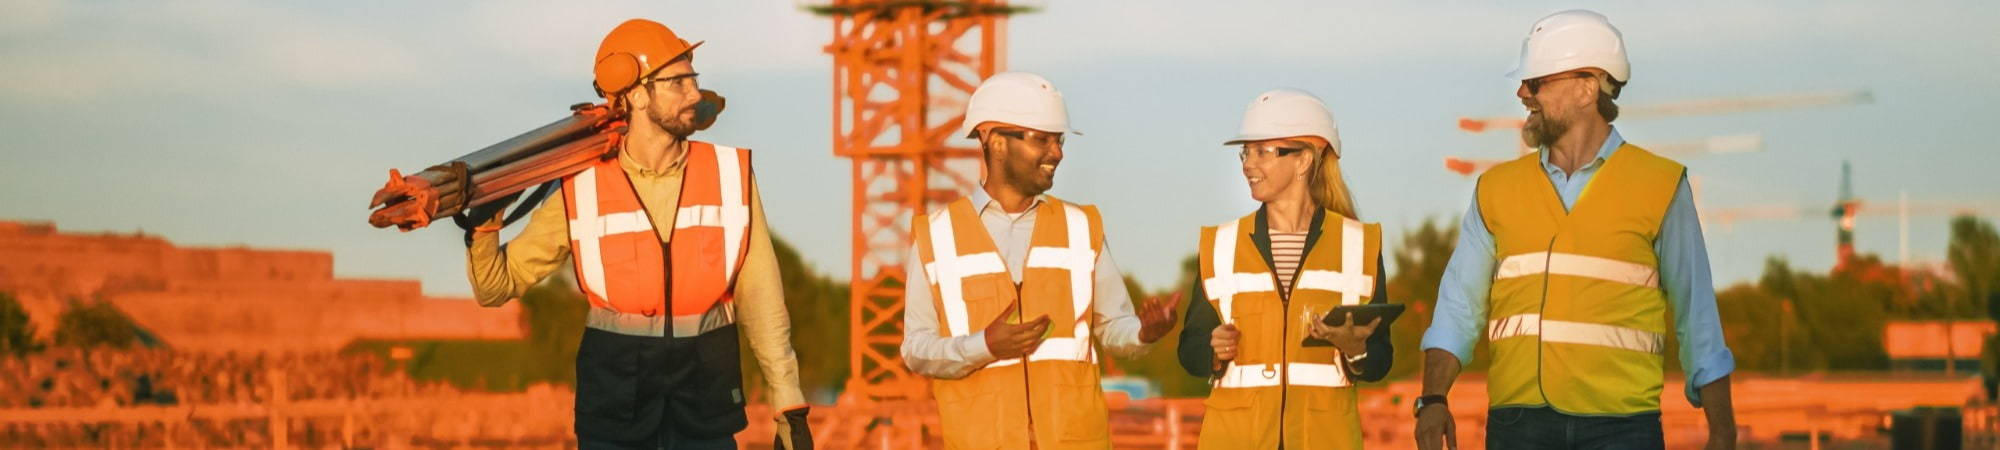 Woman consulting site workers on safety best practices